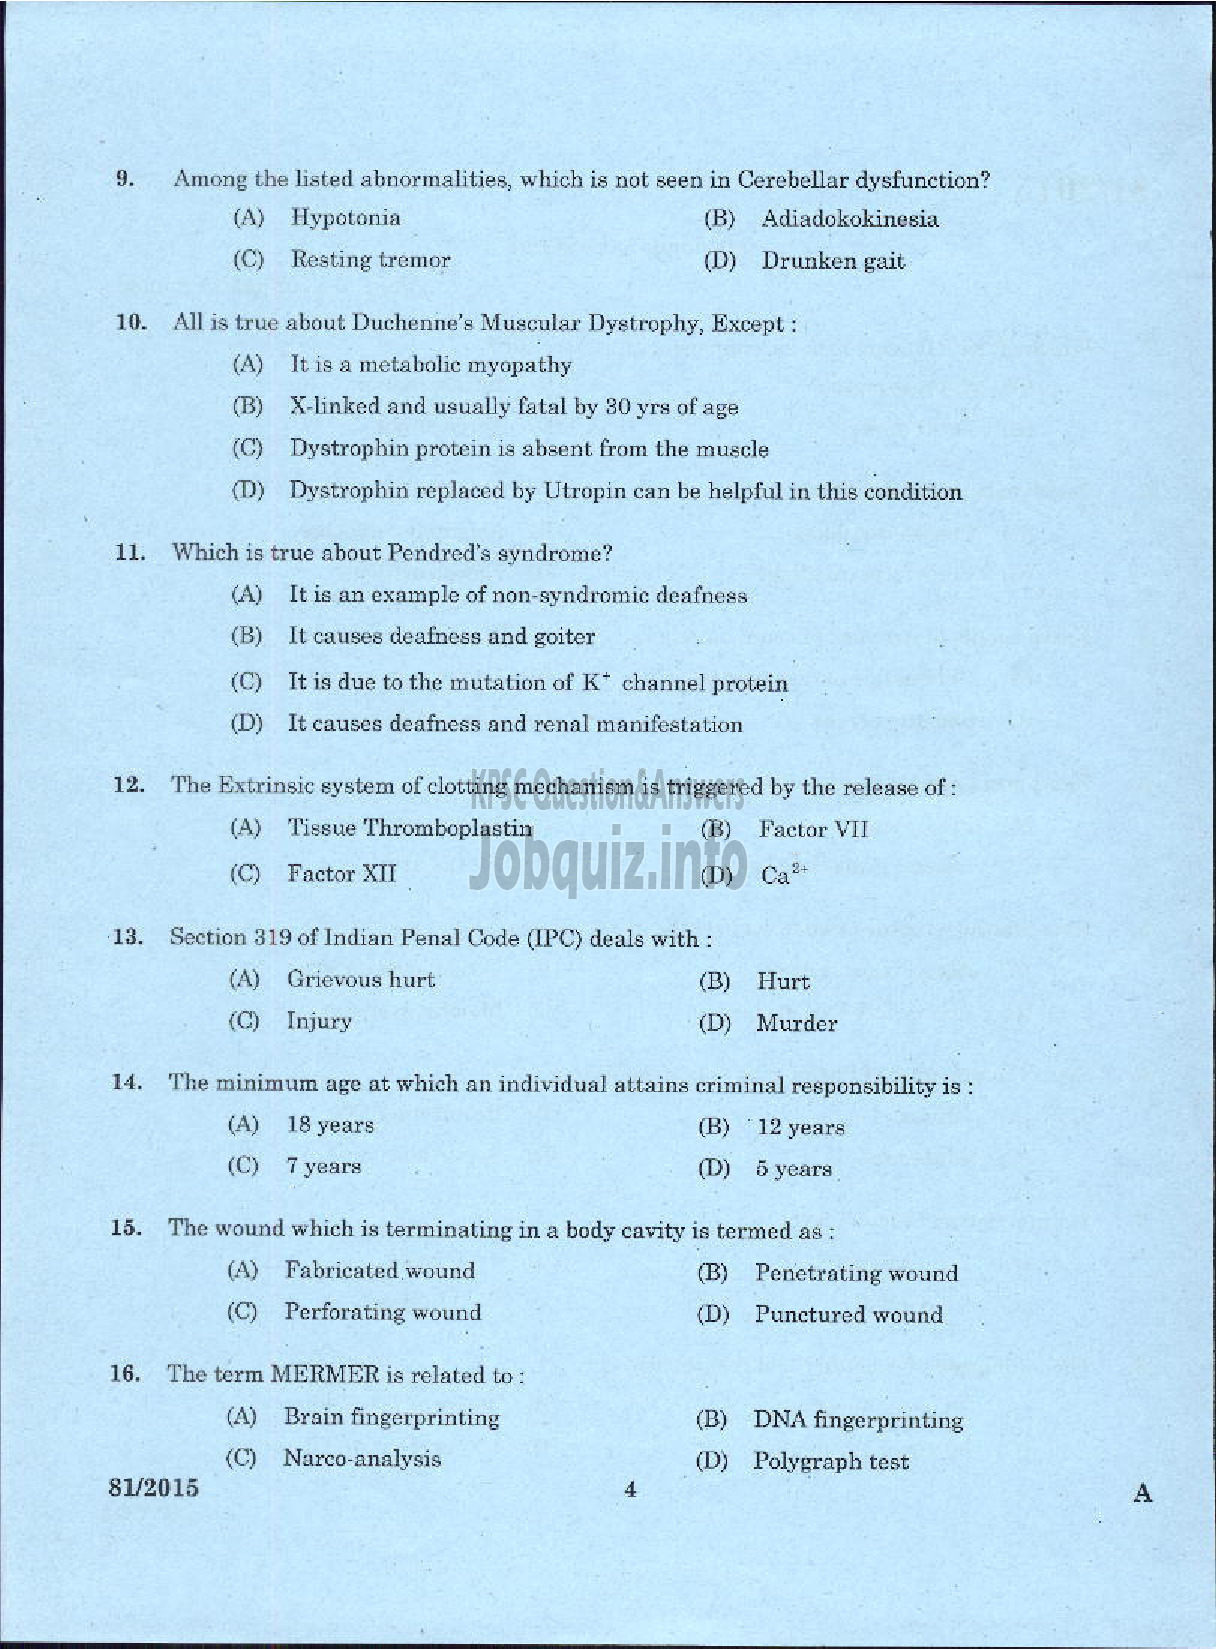 Kerala PSC Question Paper - ASSISTANT SURGEON CASUALITY MEDICAL OFFICER HEALTH SERVICES MEDICAL OFFICER KERALA FACTORIES ANS BOILERS SERVICE ASSISTANT INSURANCE MEDICAL OFFICER IMS-2